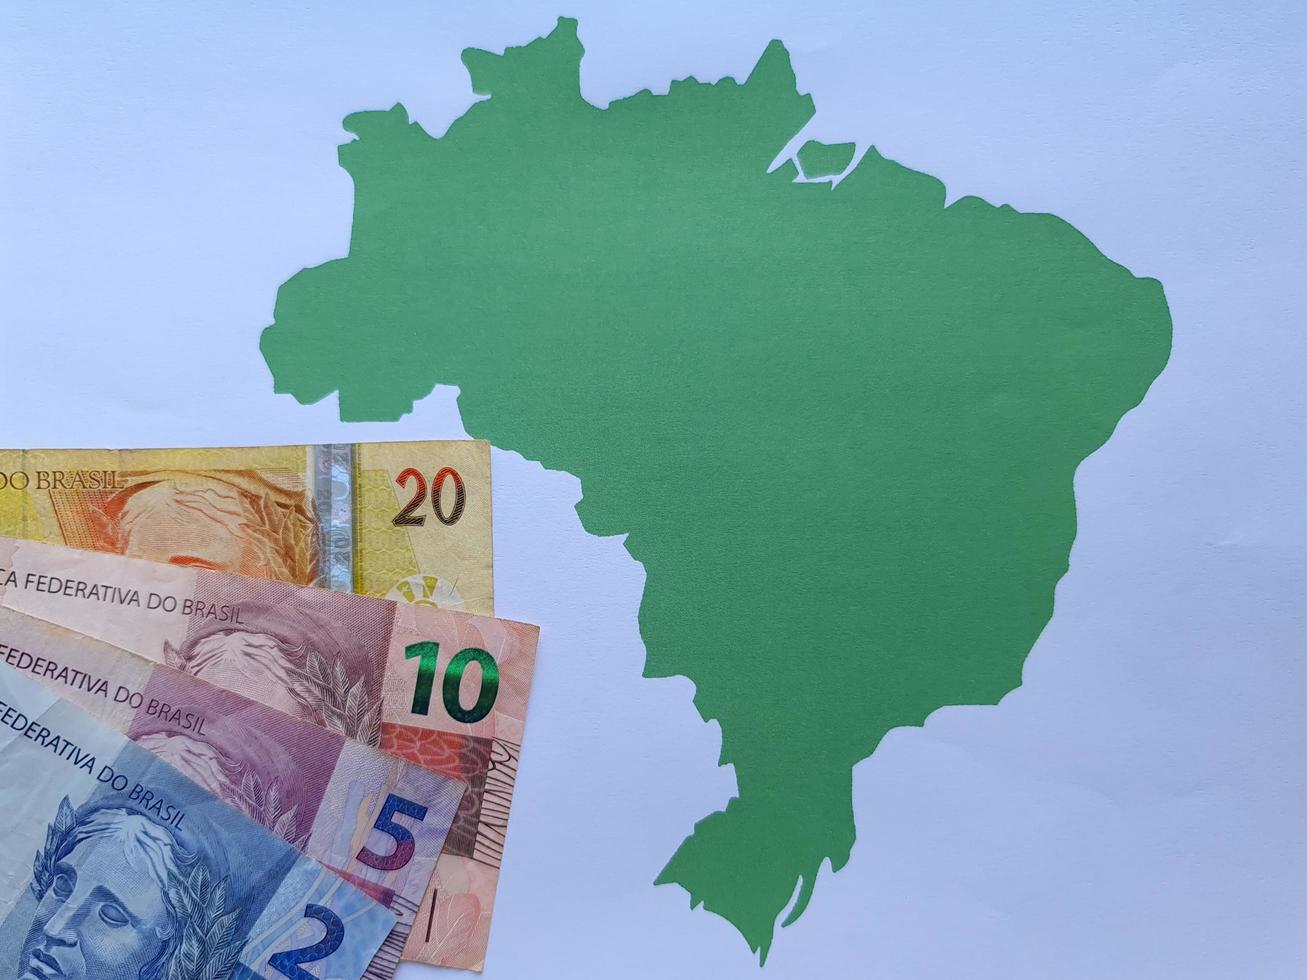 Brazilian banknotes and background with Brazil map silhouette photo